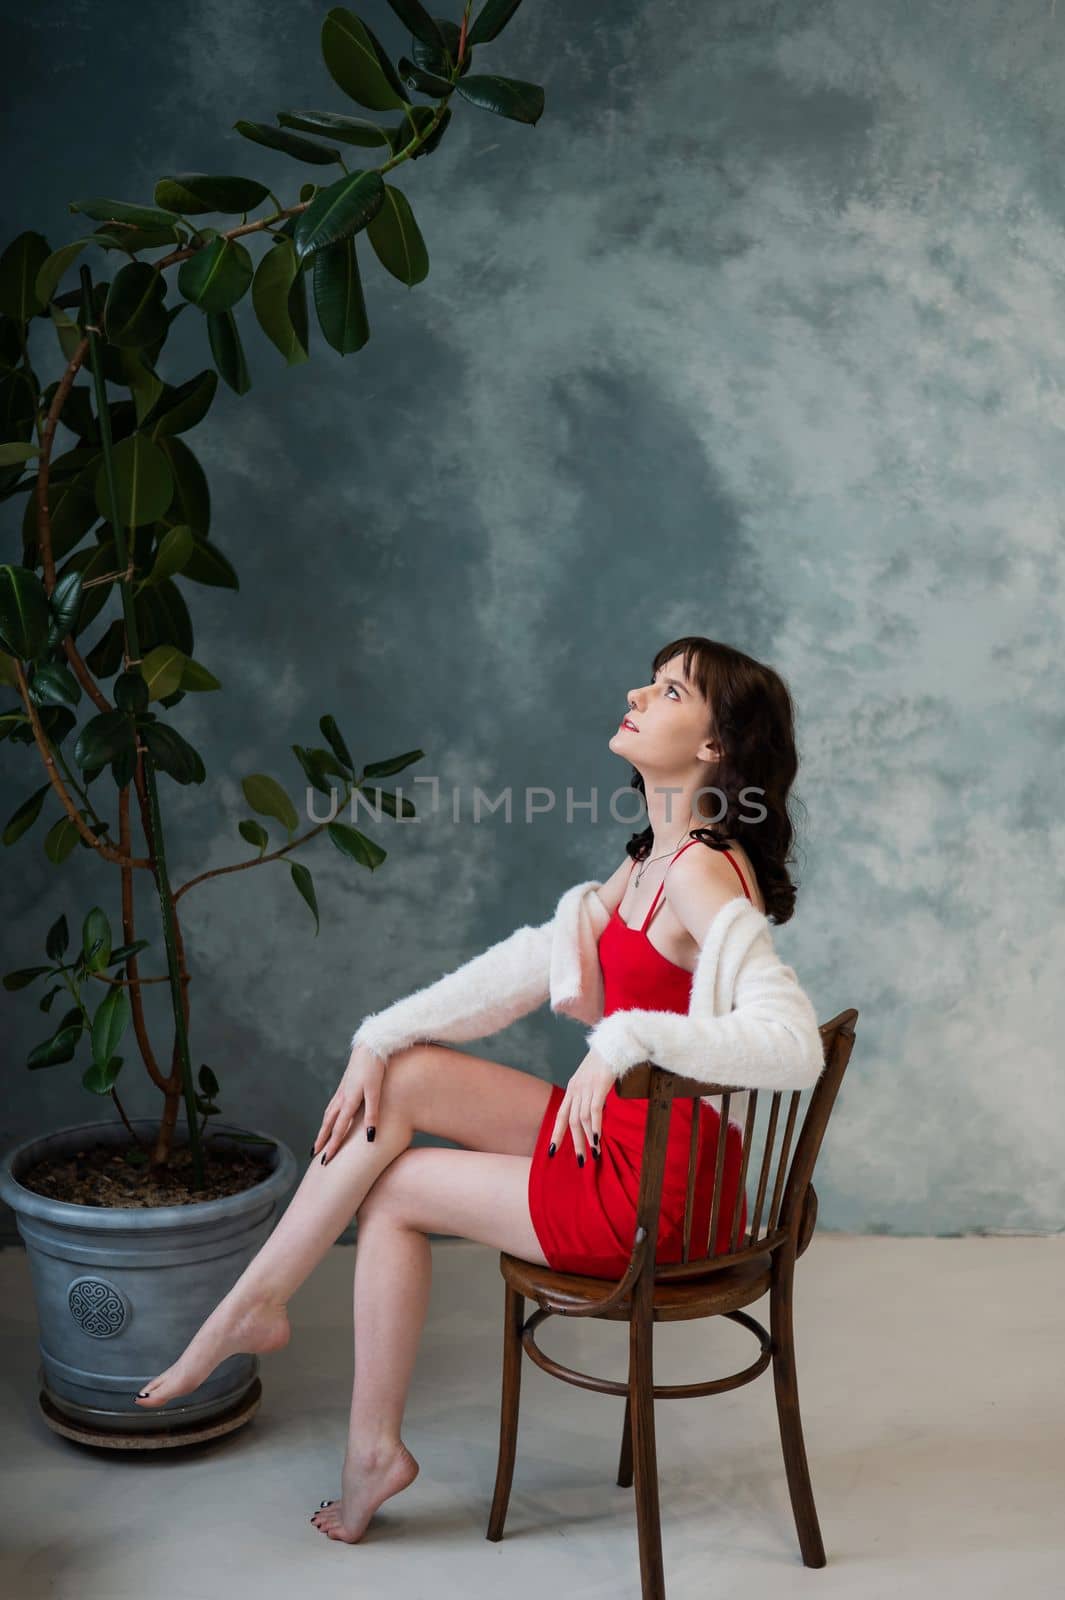 Caucasian brunette woman sits on a wooden chair against a gray wall background